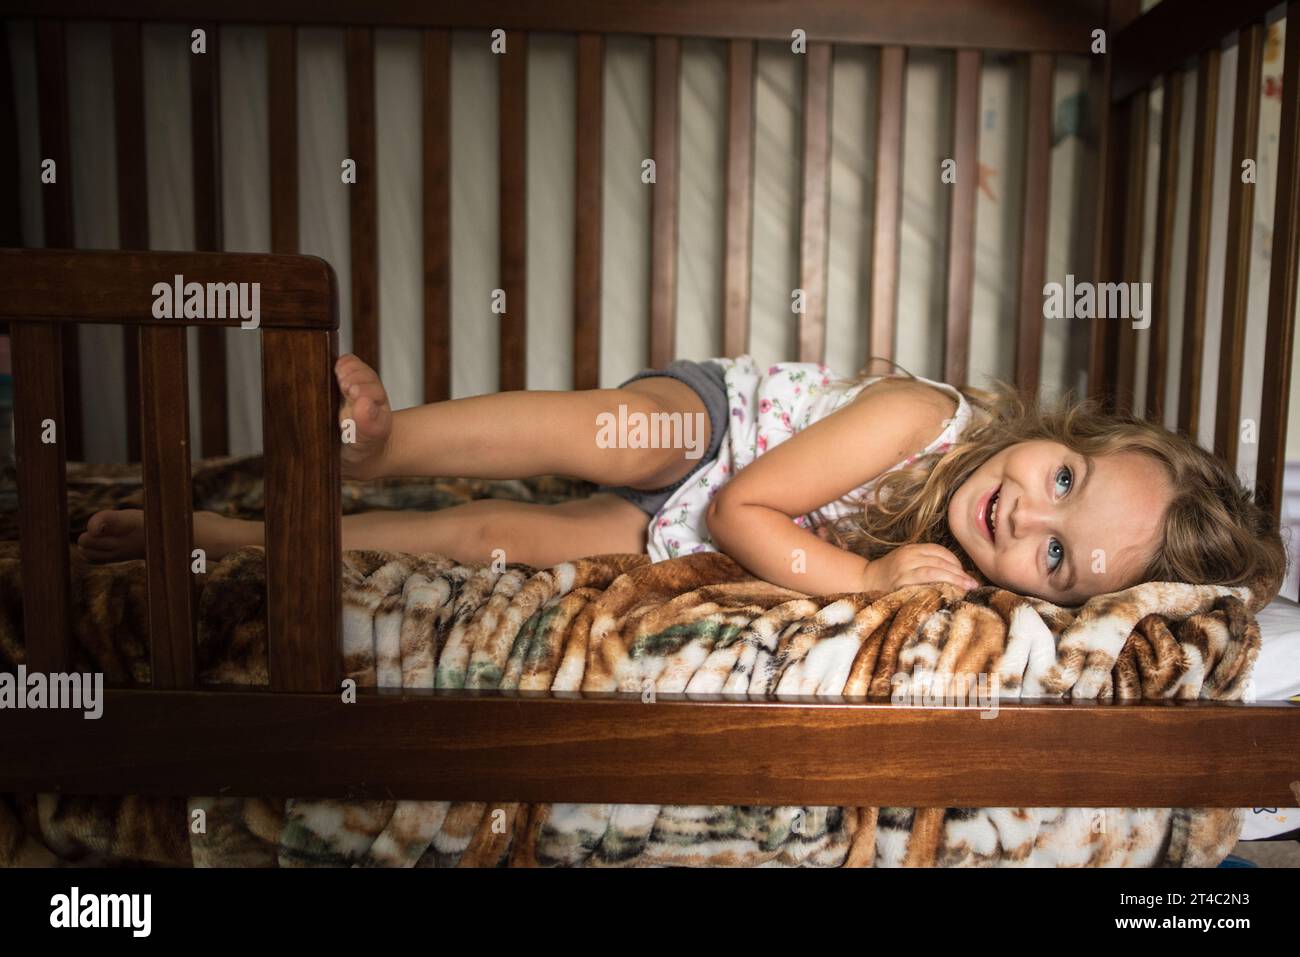 Beautiful young girl smiling in bed Stock Photo